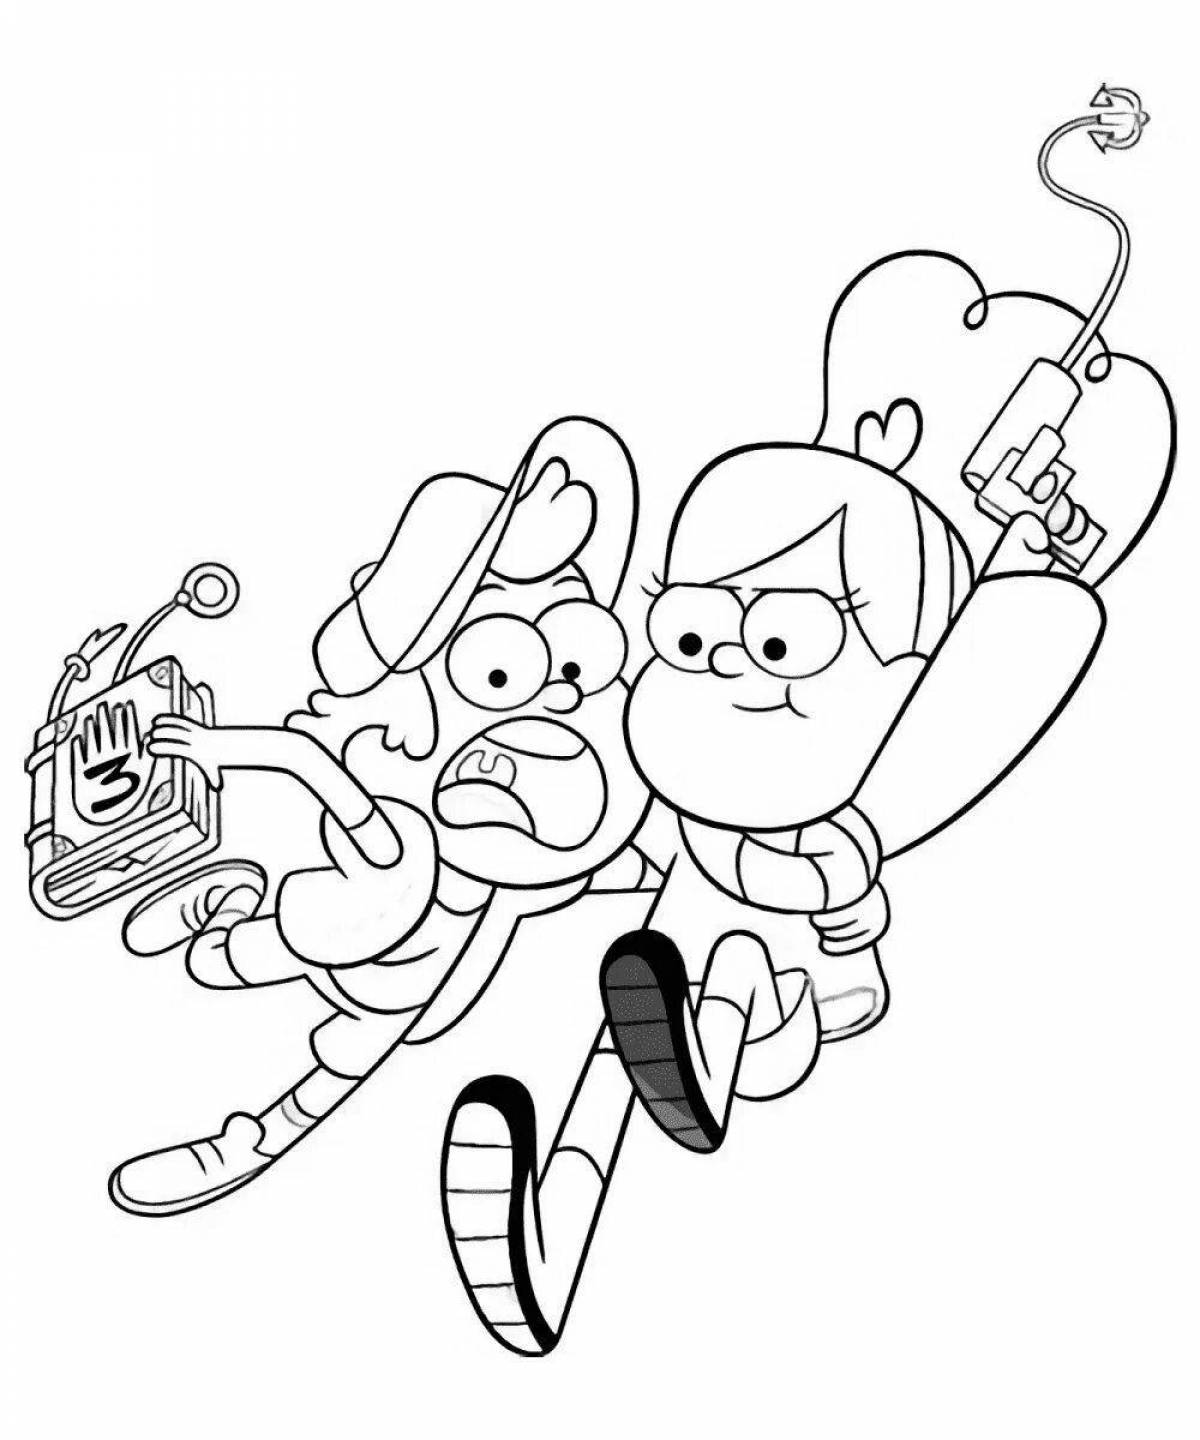 Attractive gravity coloring page